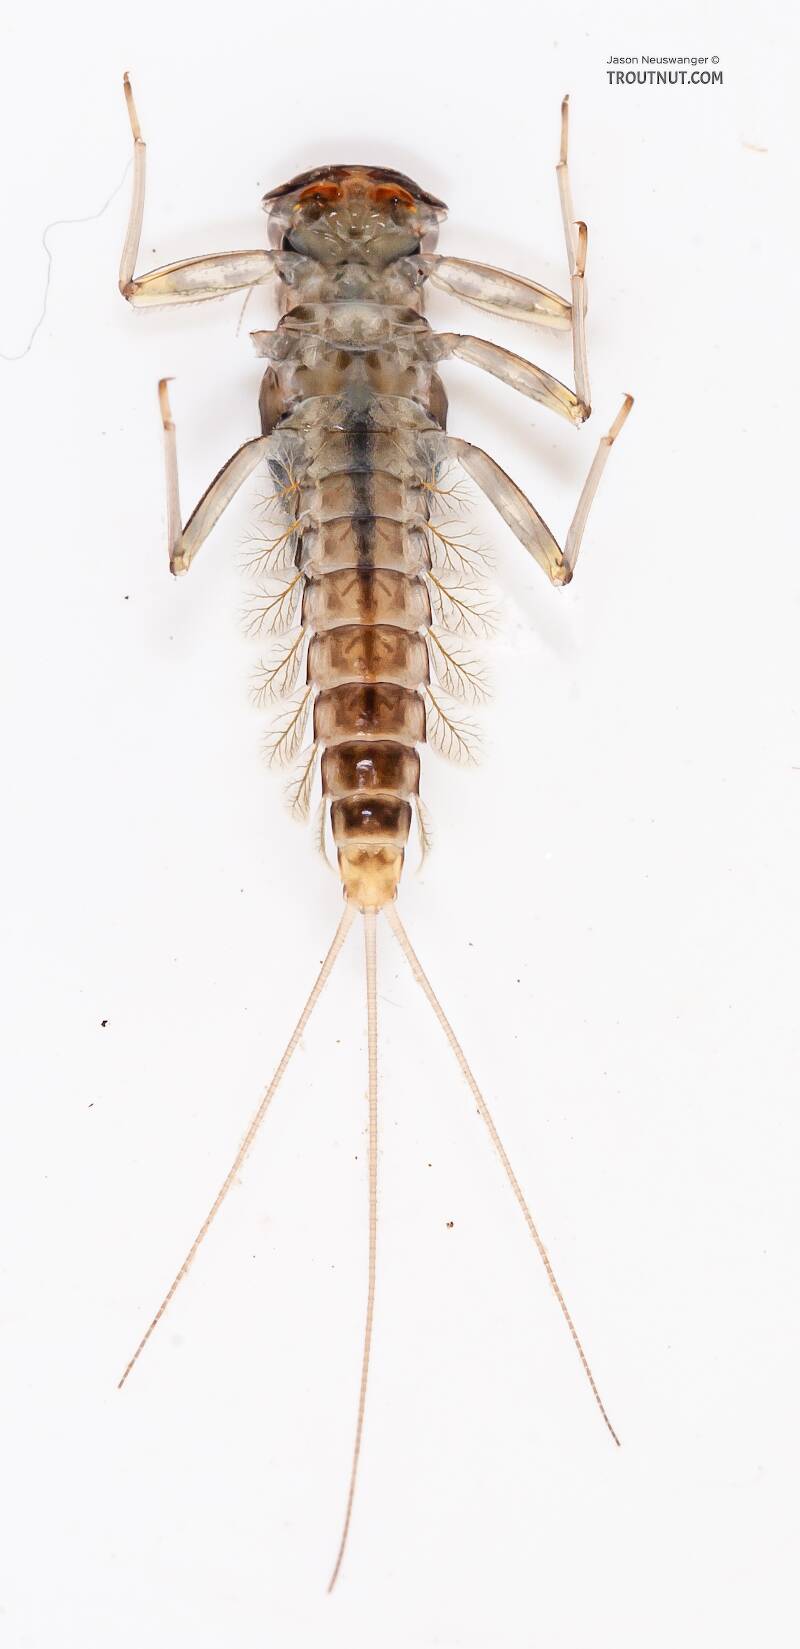 Ventral view of a Cinygmula (Heptageniidae) (Dark Red Quill) Mayfly Nymph from the Gulkana River in Alaska